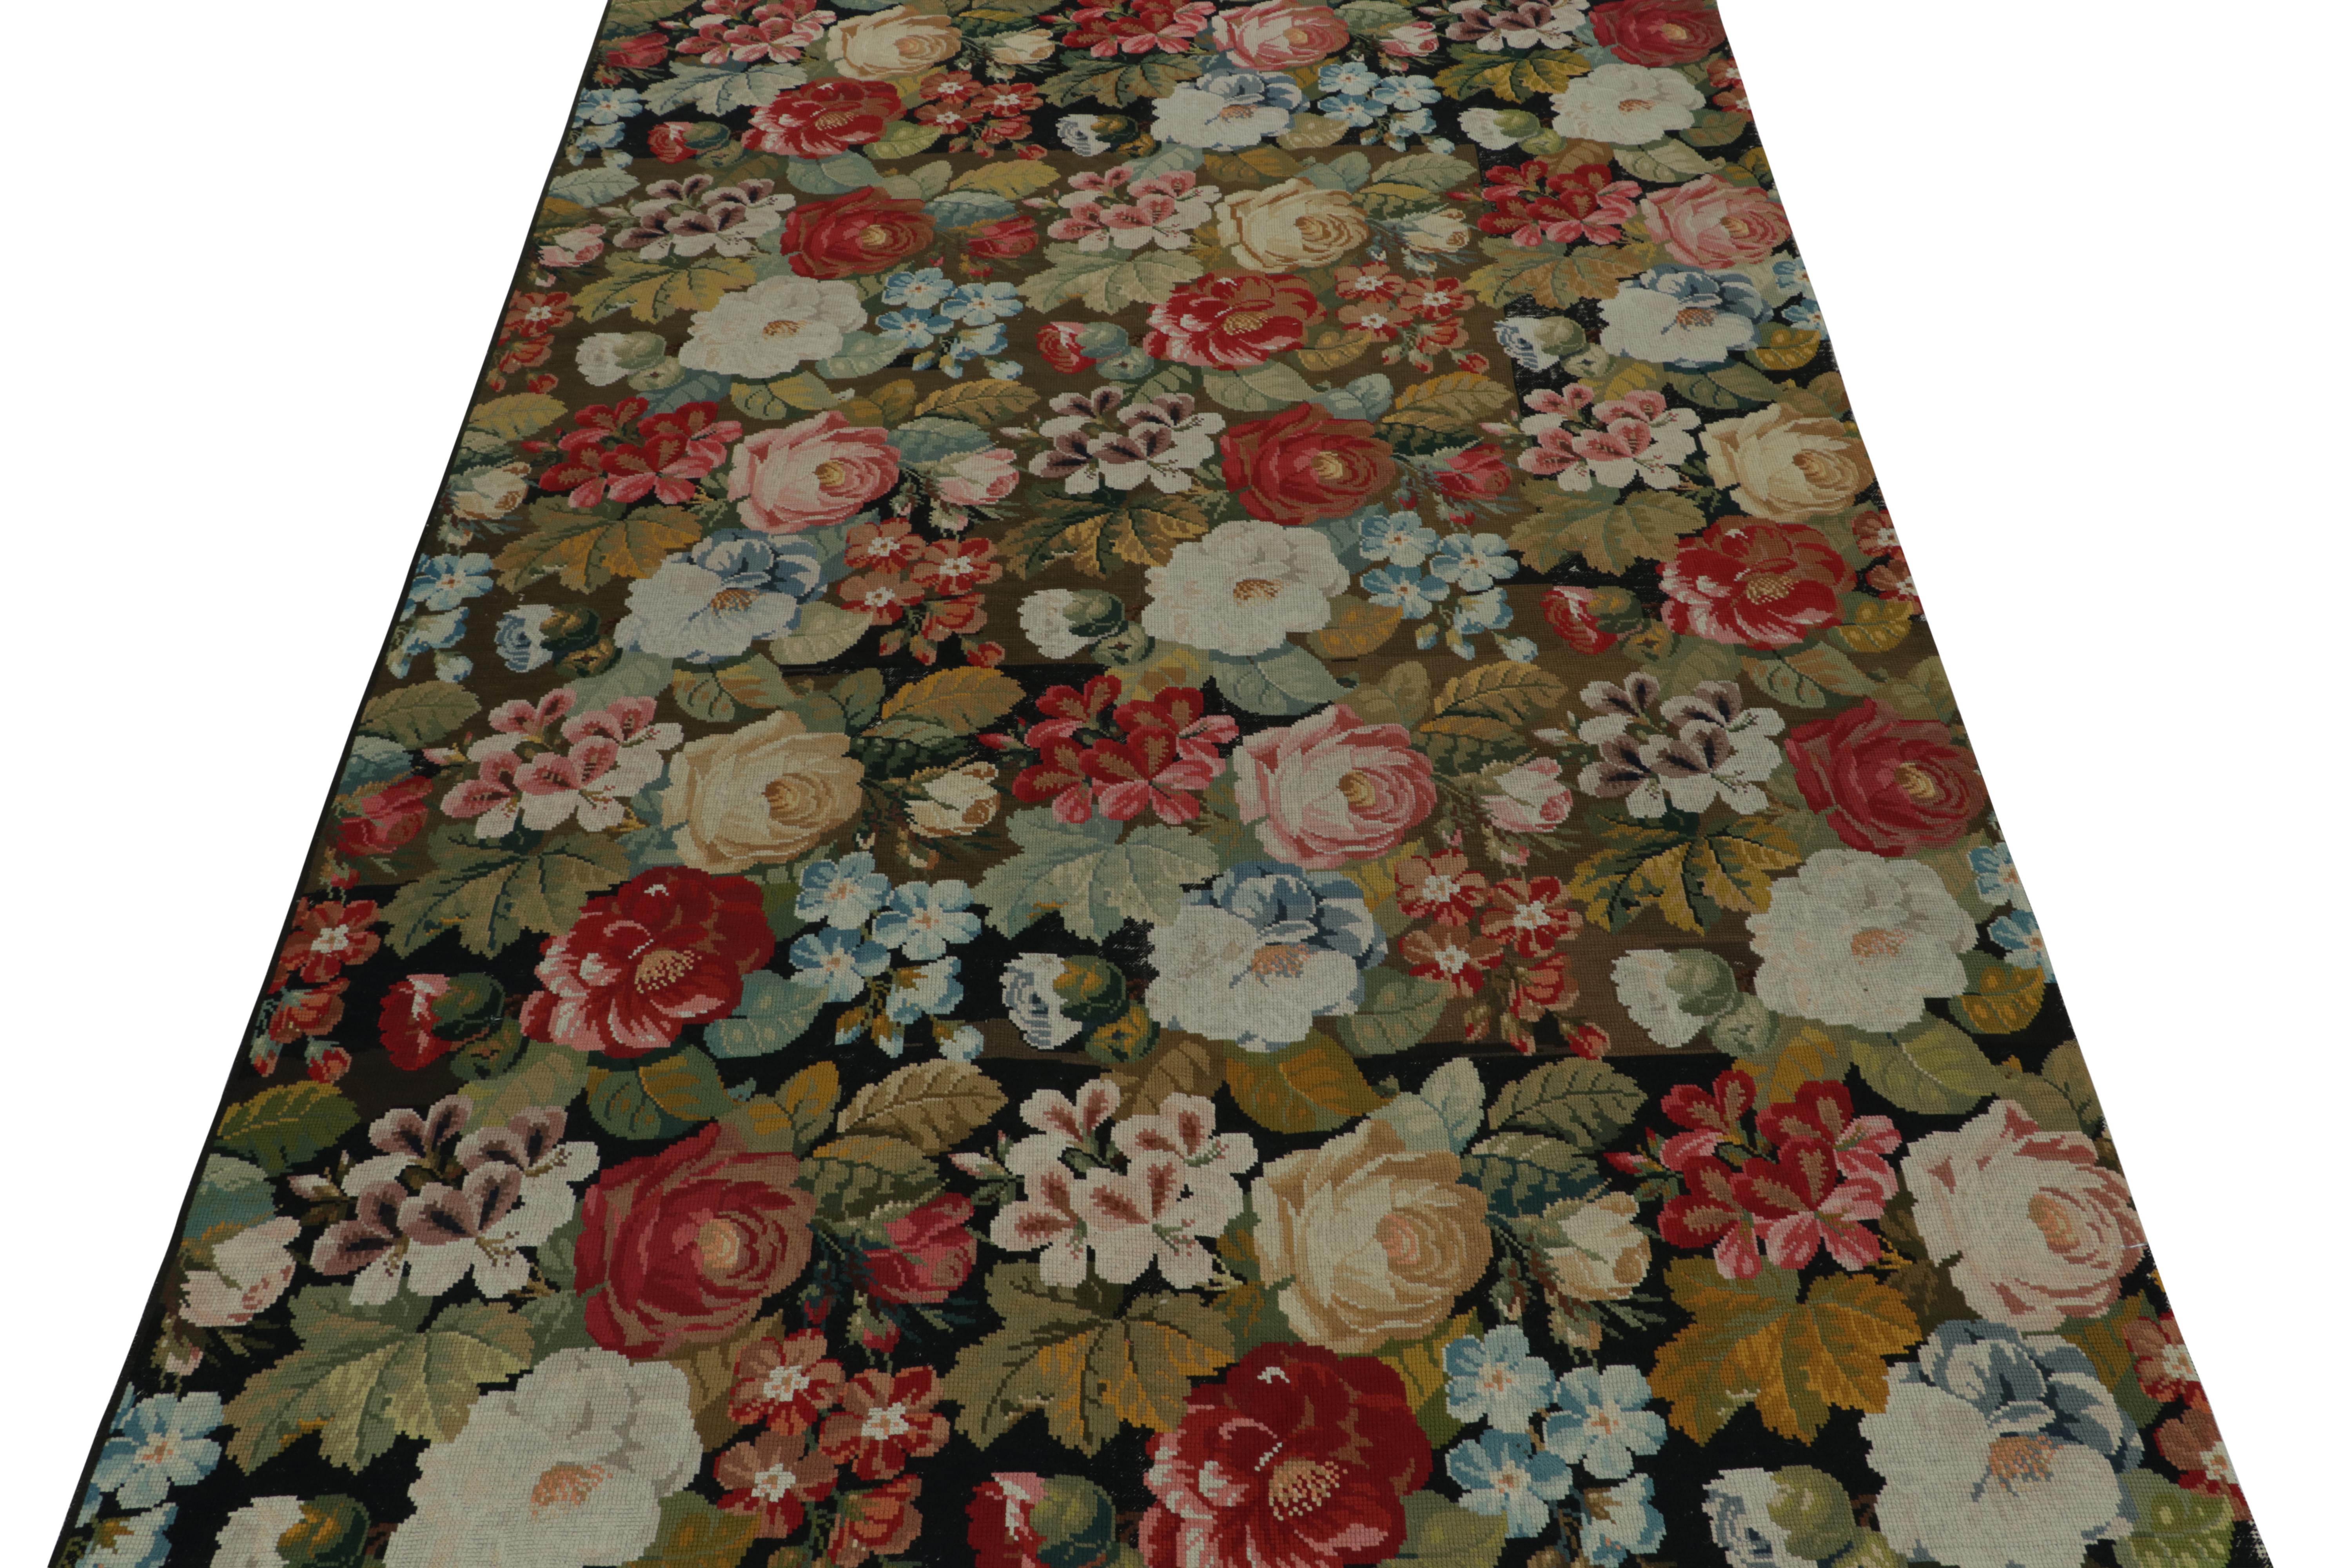 English Antique Needlepoint Rug in with Red and Green Floral Patterns, by Rug & Kilim For Sale